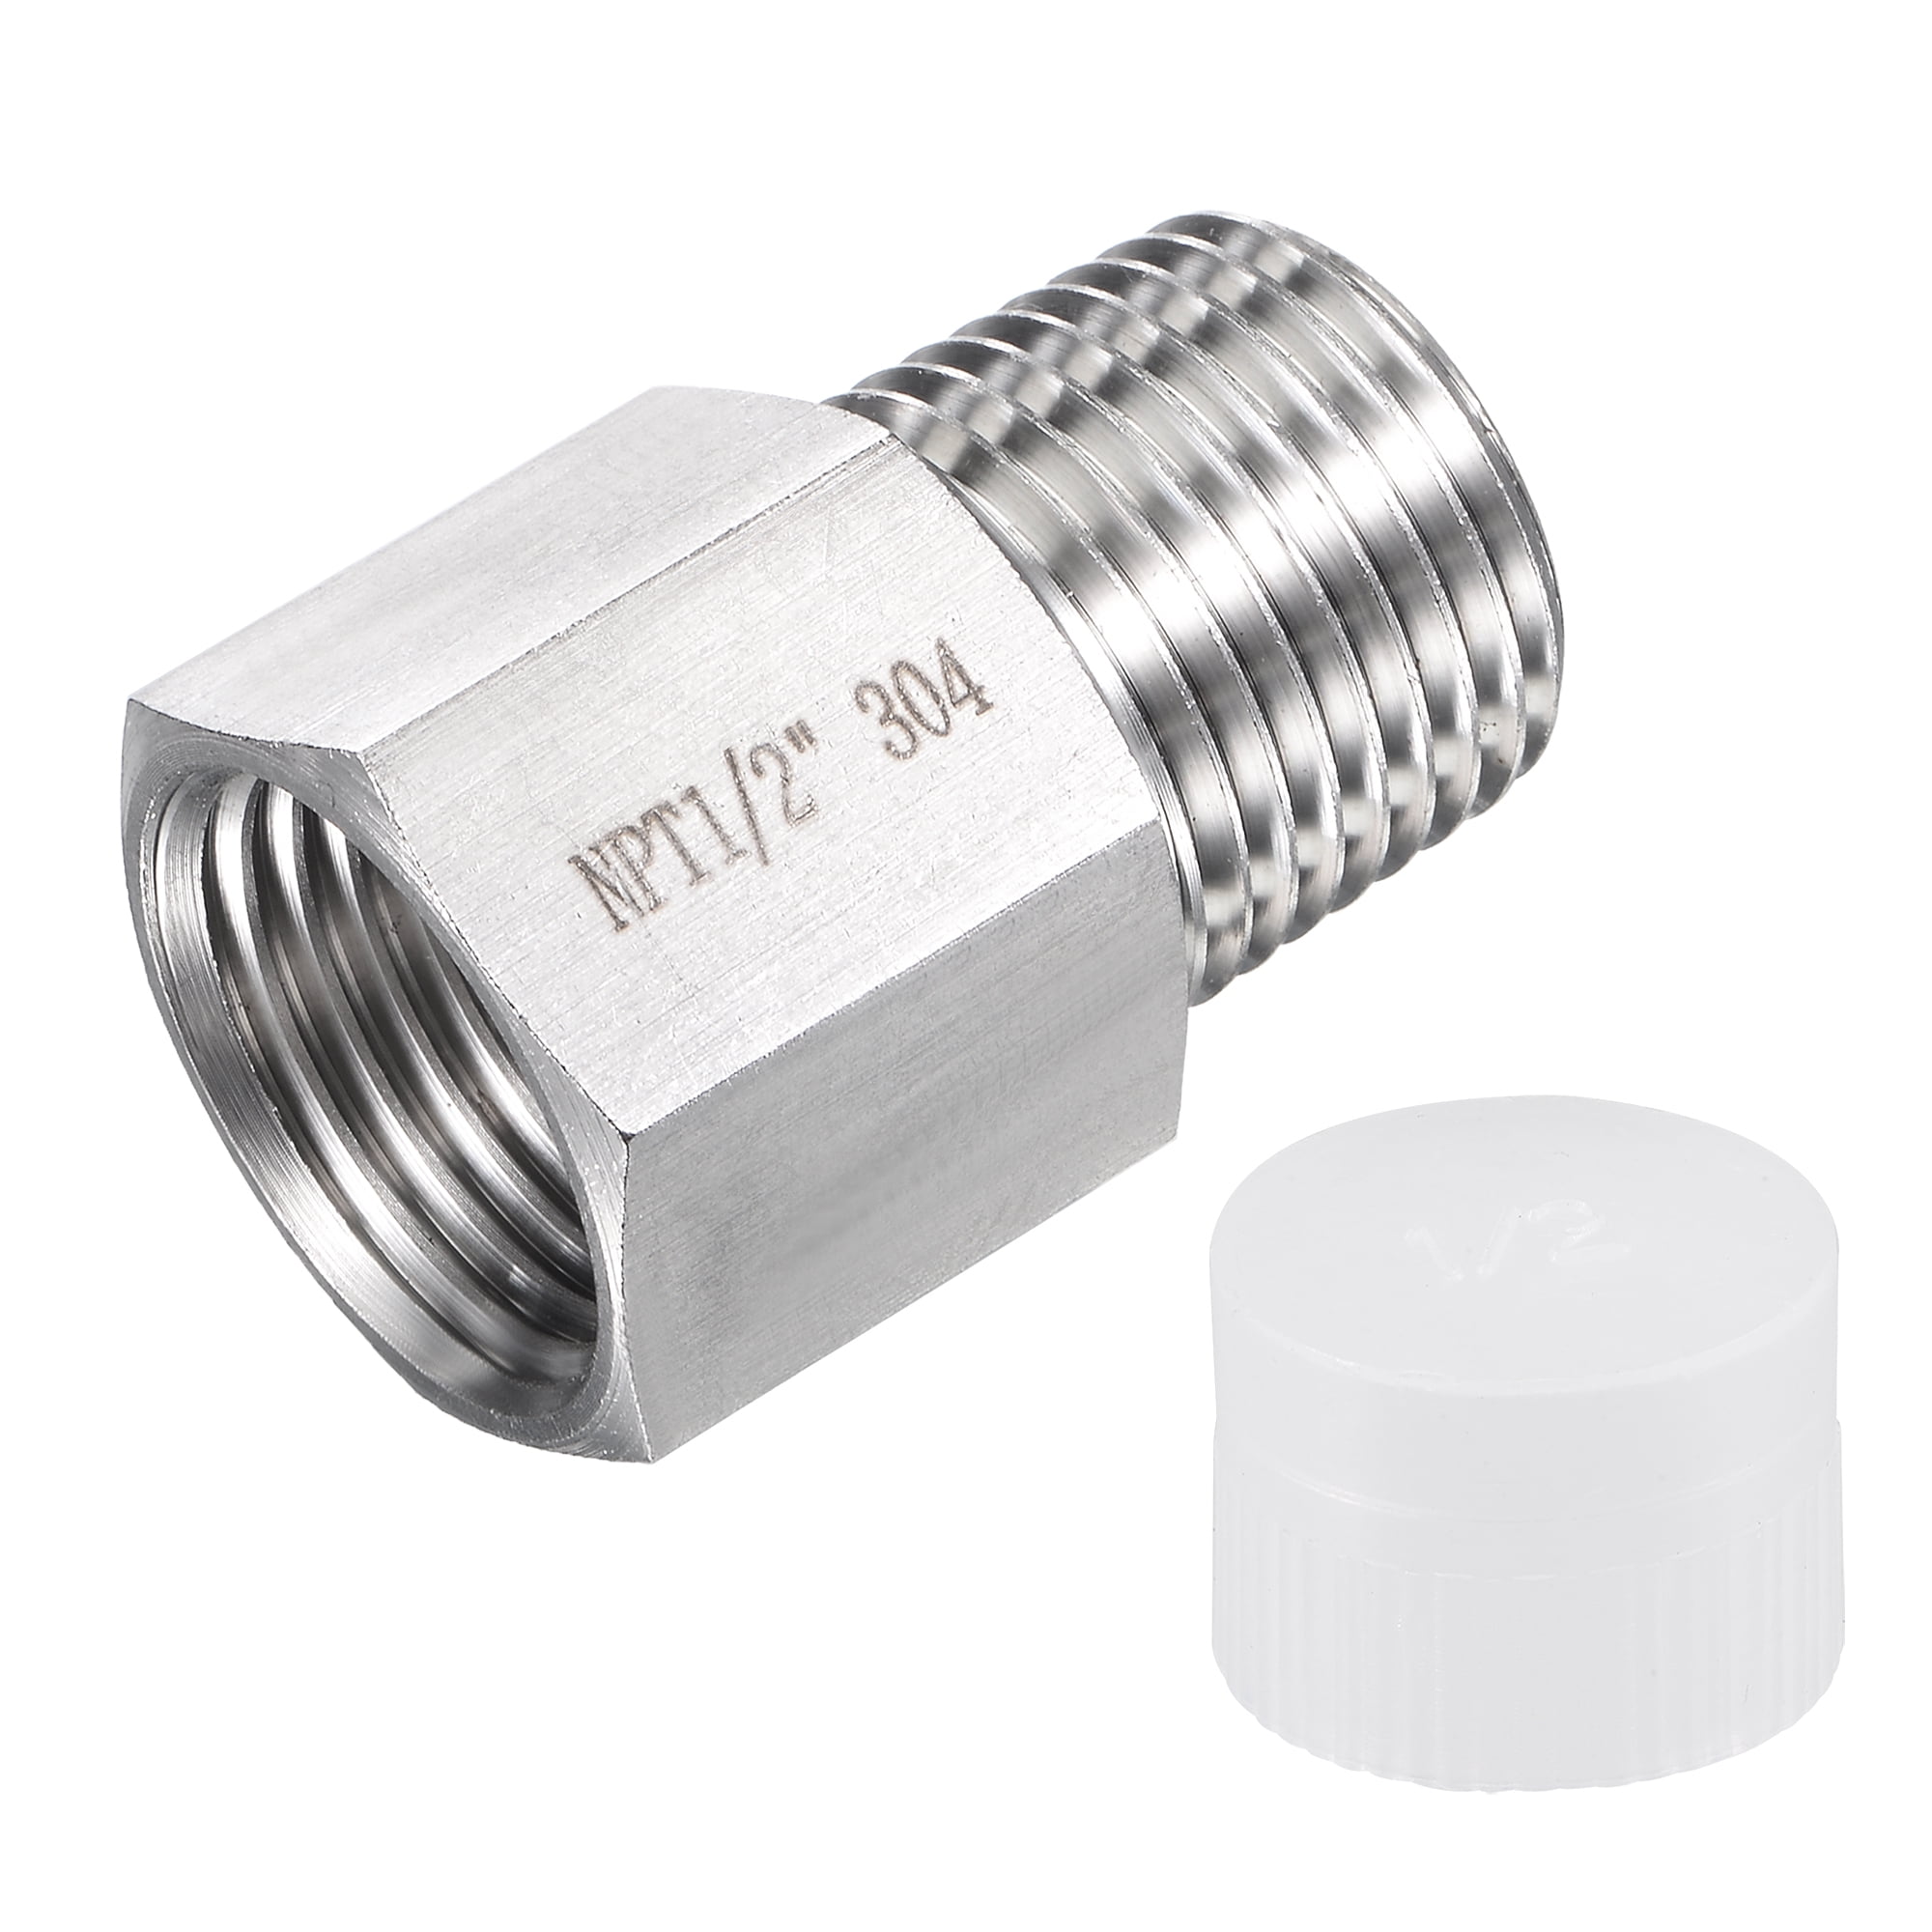 304 Stainless Steel BSPT 1/8"-2" Male Thread Reducer Connector Fittings Adapter 